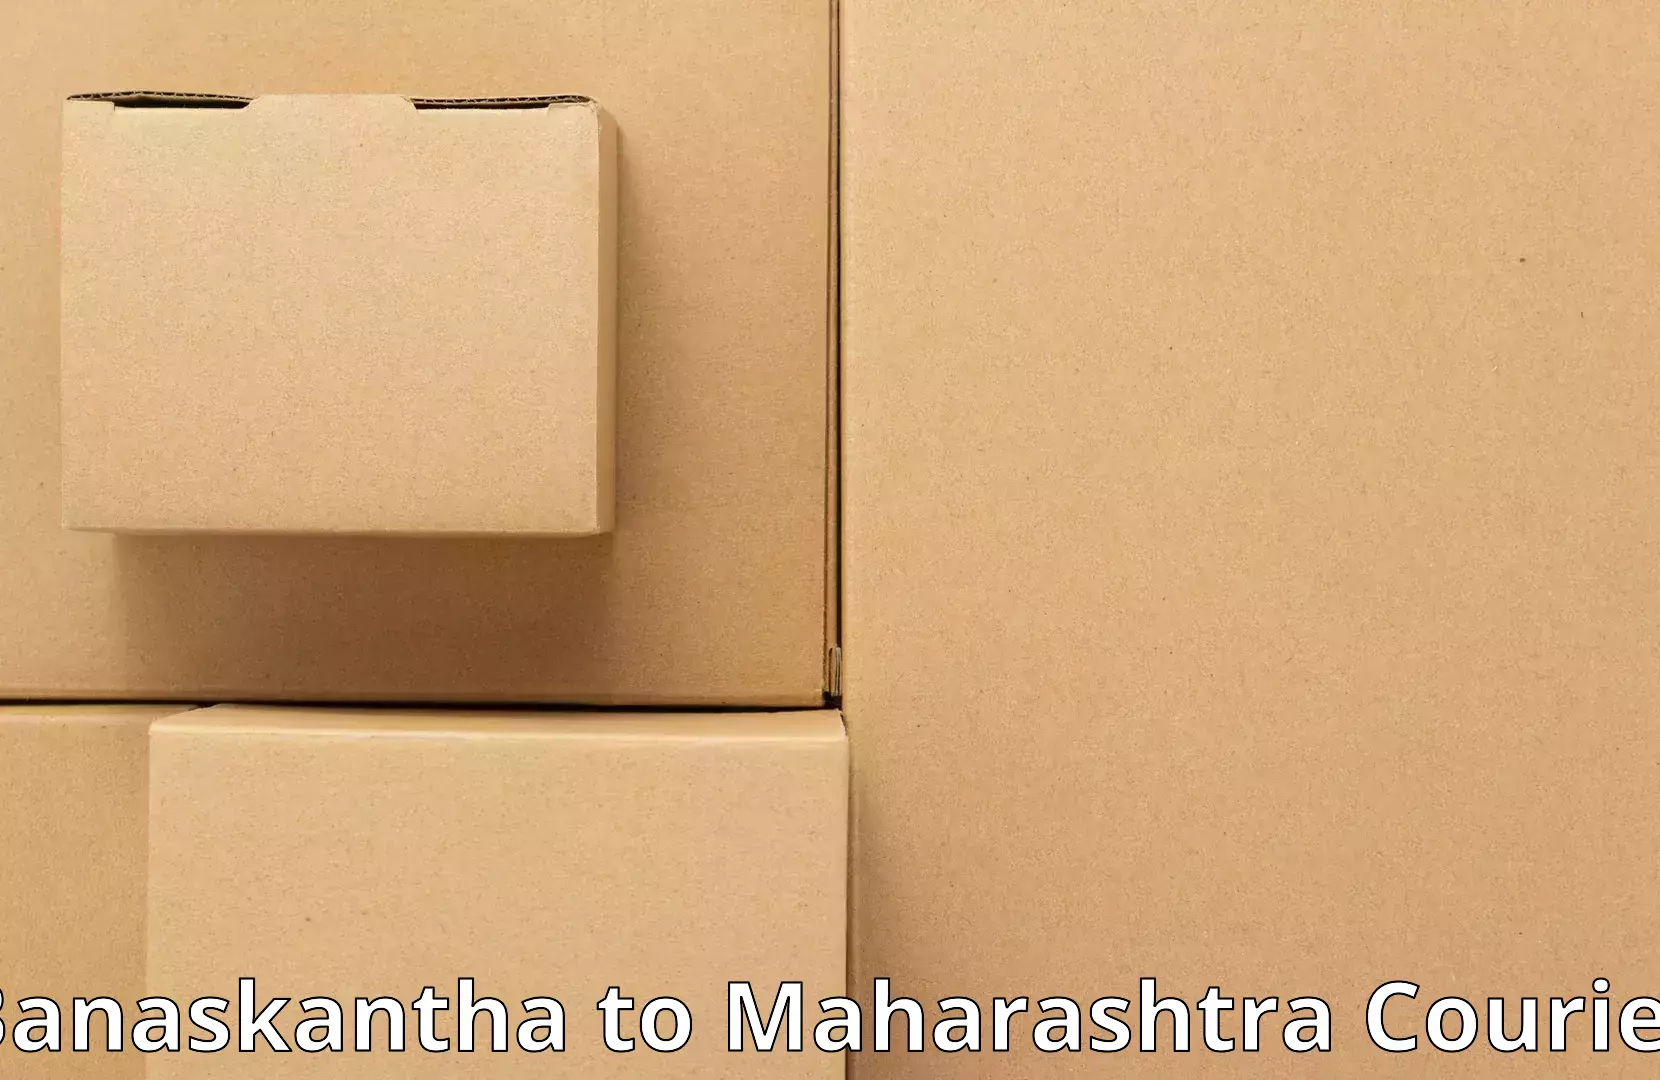 Home relocation experts Banaskantha to Pune